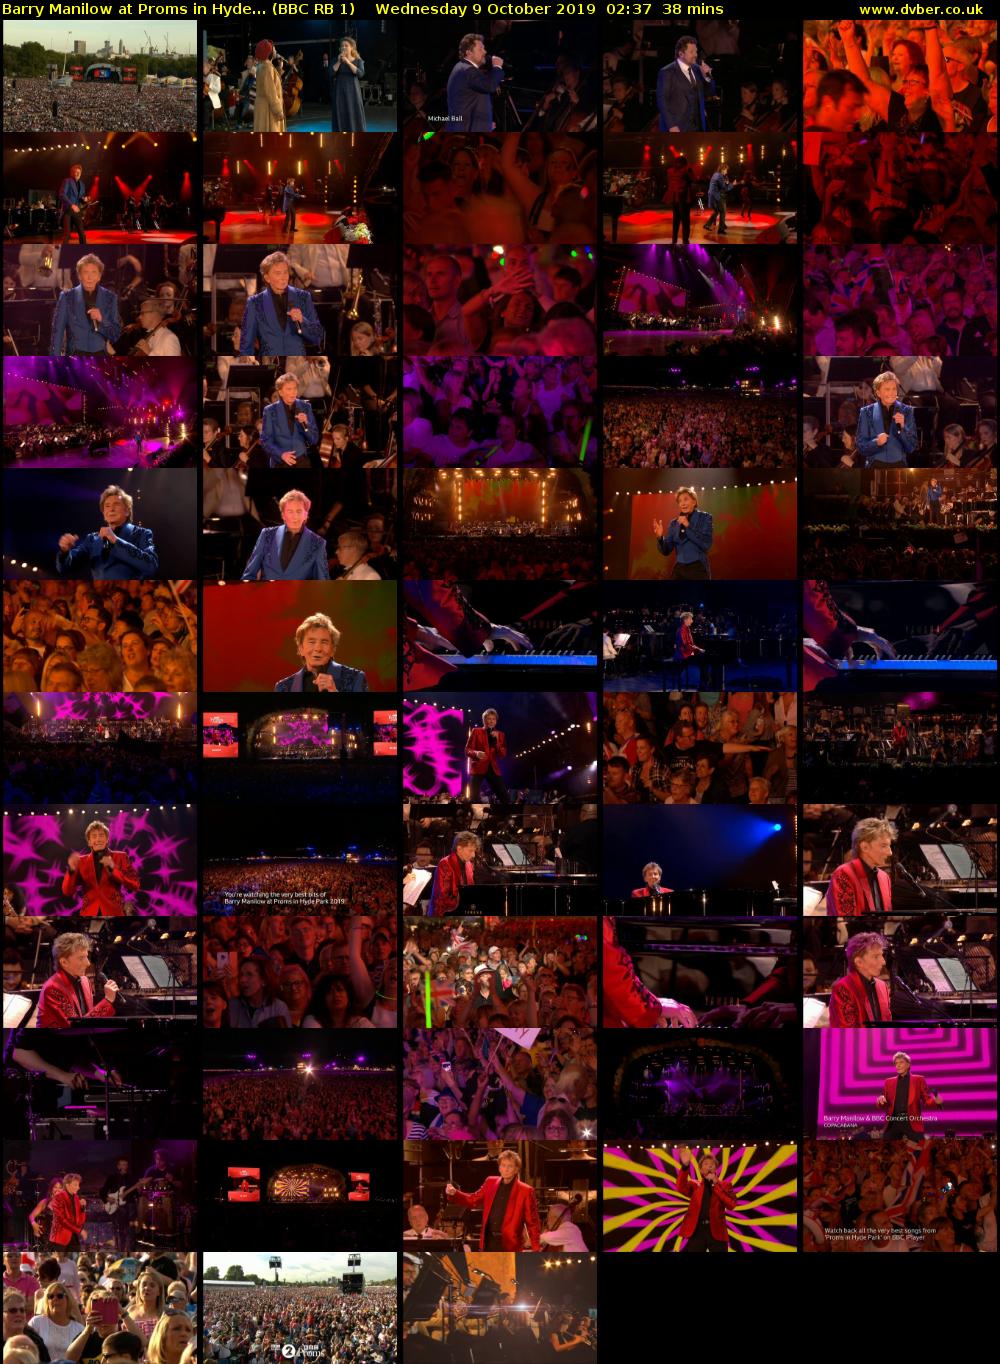 Barry Manilow at Proms in Hyde... (BBC RB 1) Wednesday 9 October 2019 02:37 - 03:15